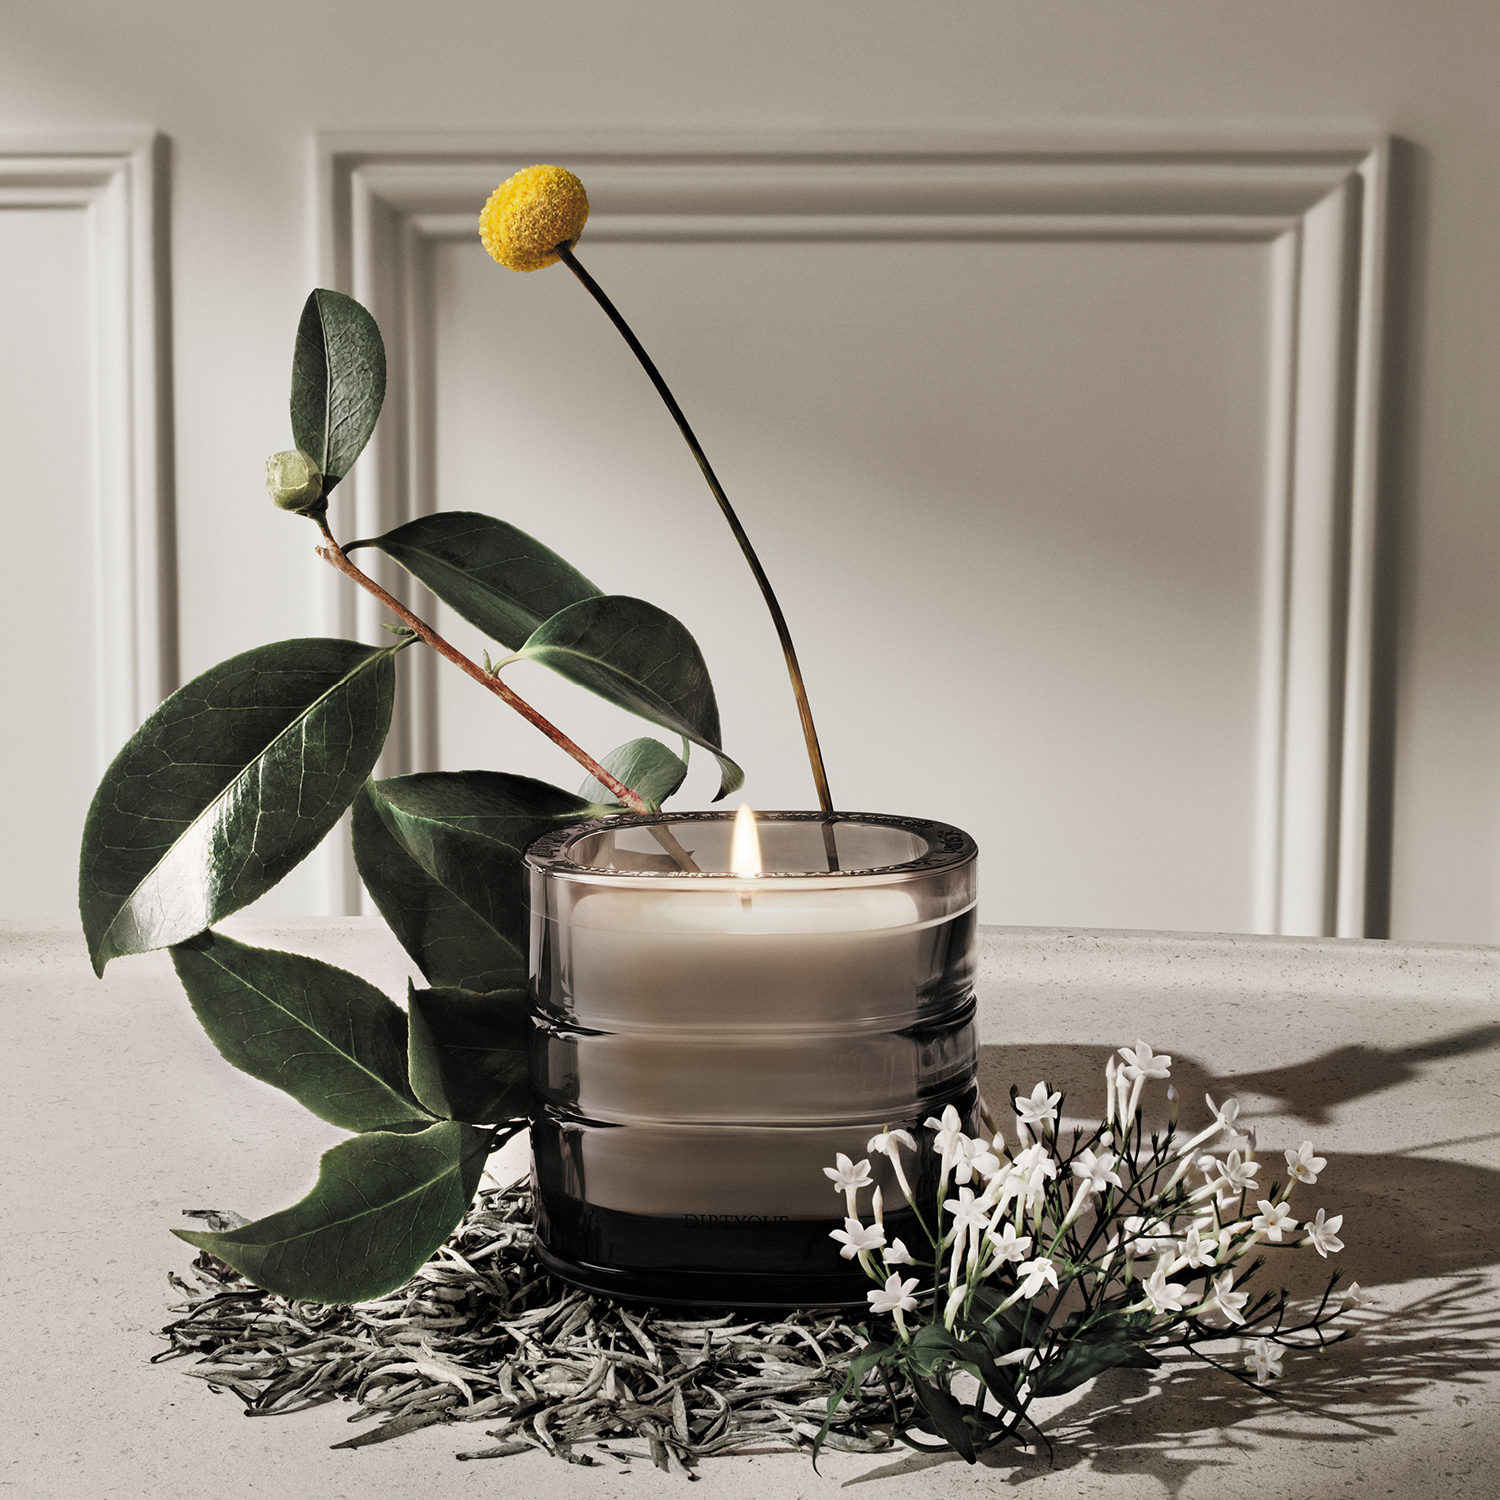 Winter Decor: Inspiring Ways to Add Warmth with Scented Candles